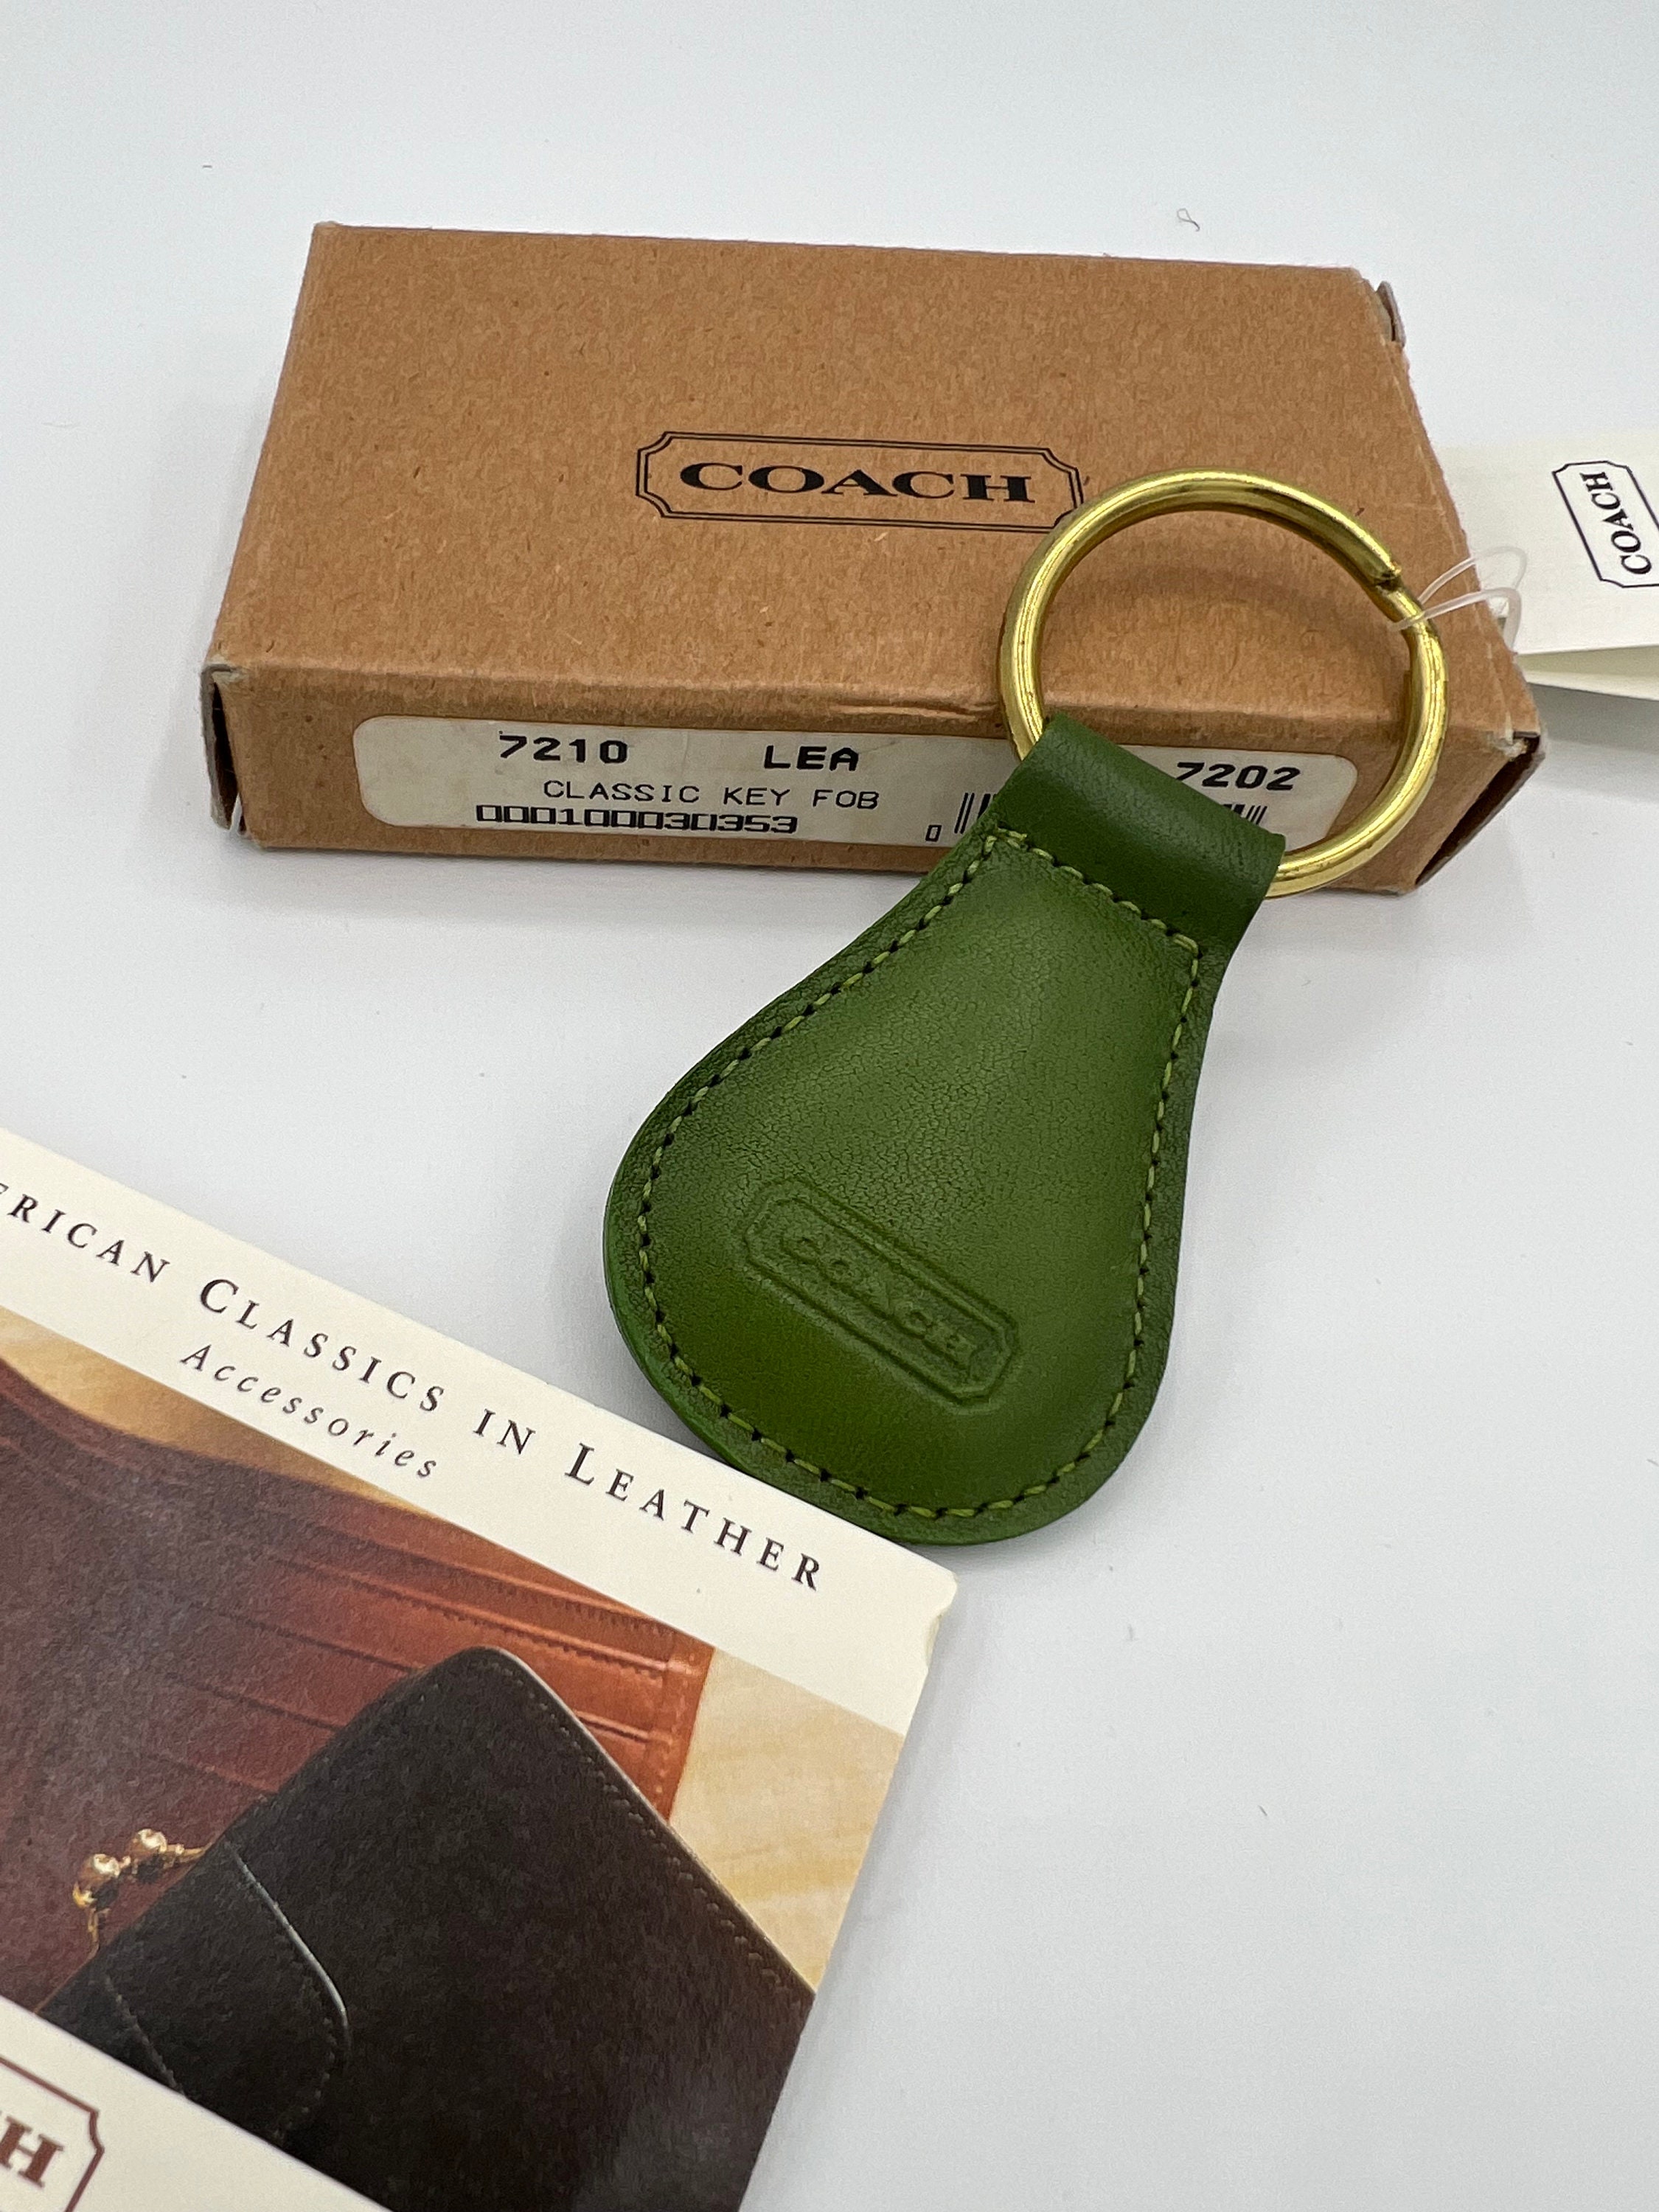 BN Coach Loop Key Fob with Coach Patch Keychain Leather NWT Pick Color